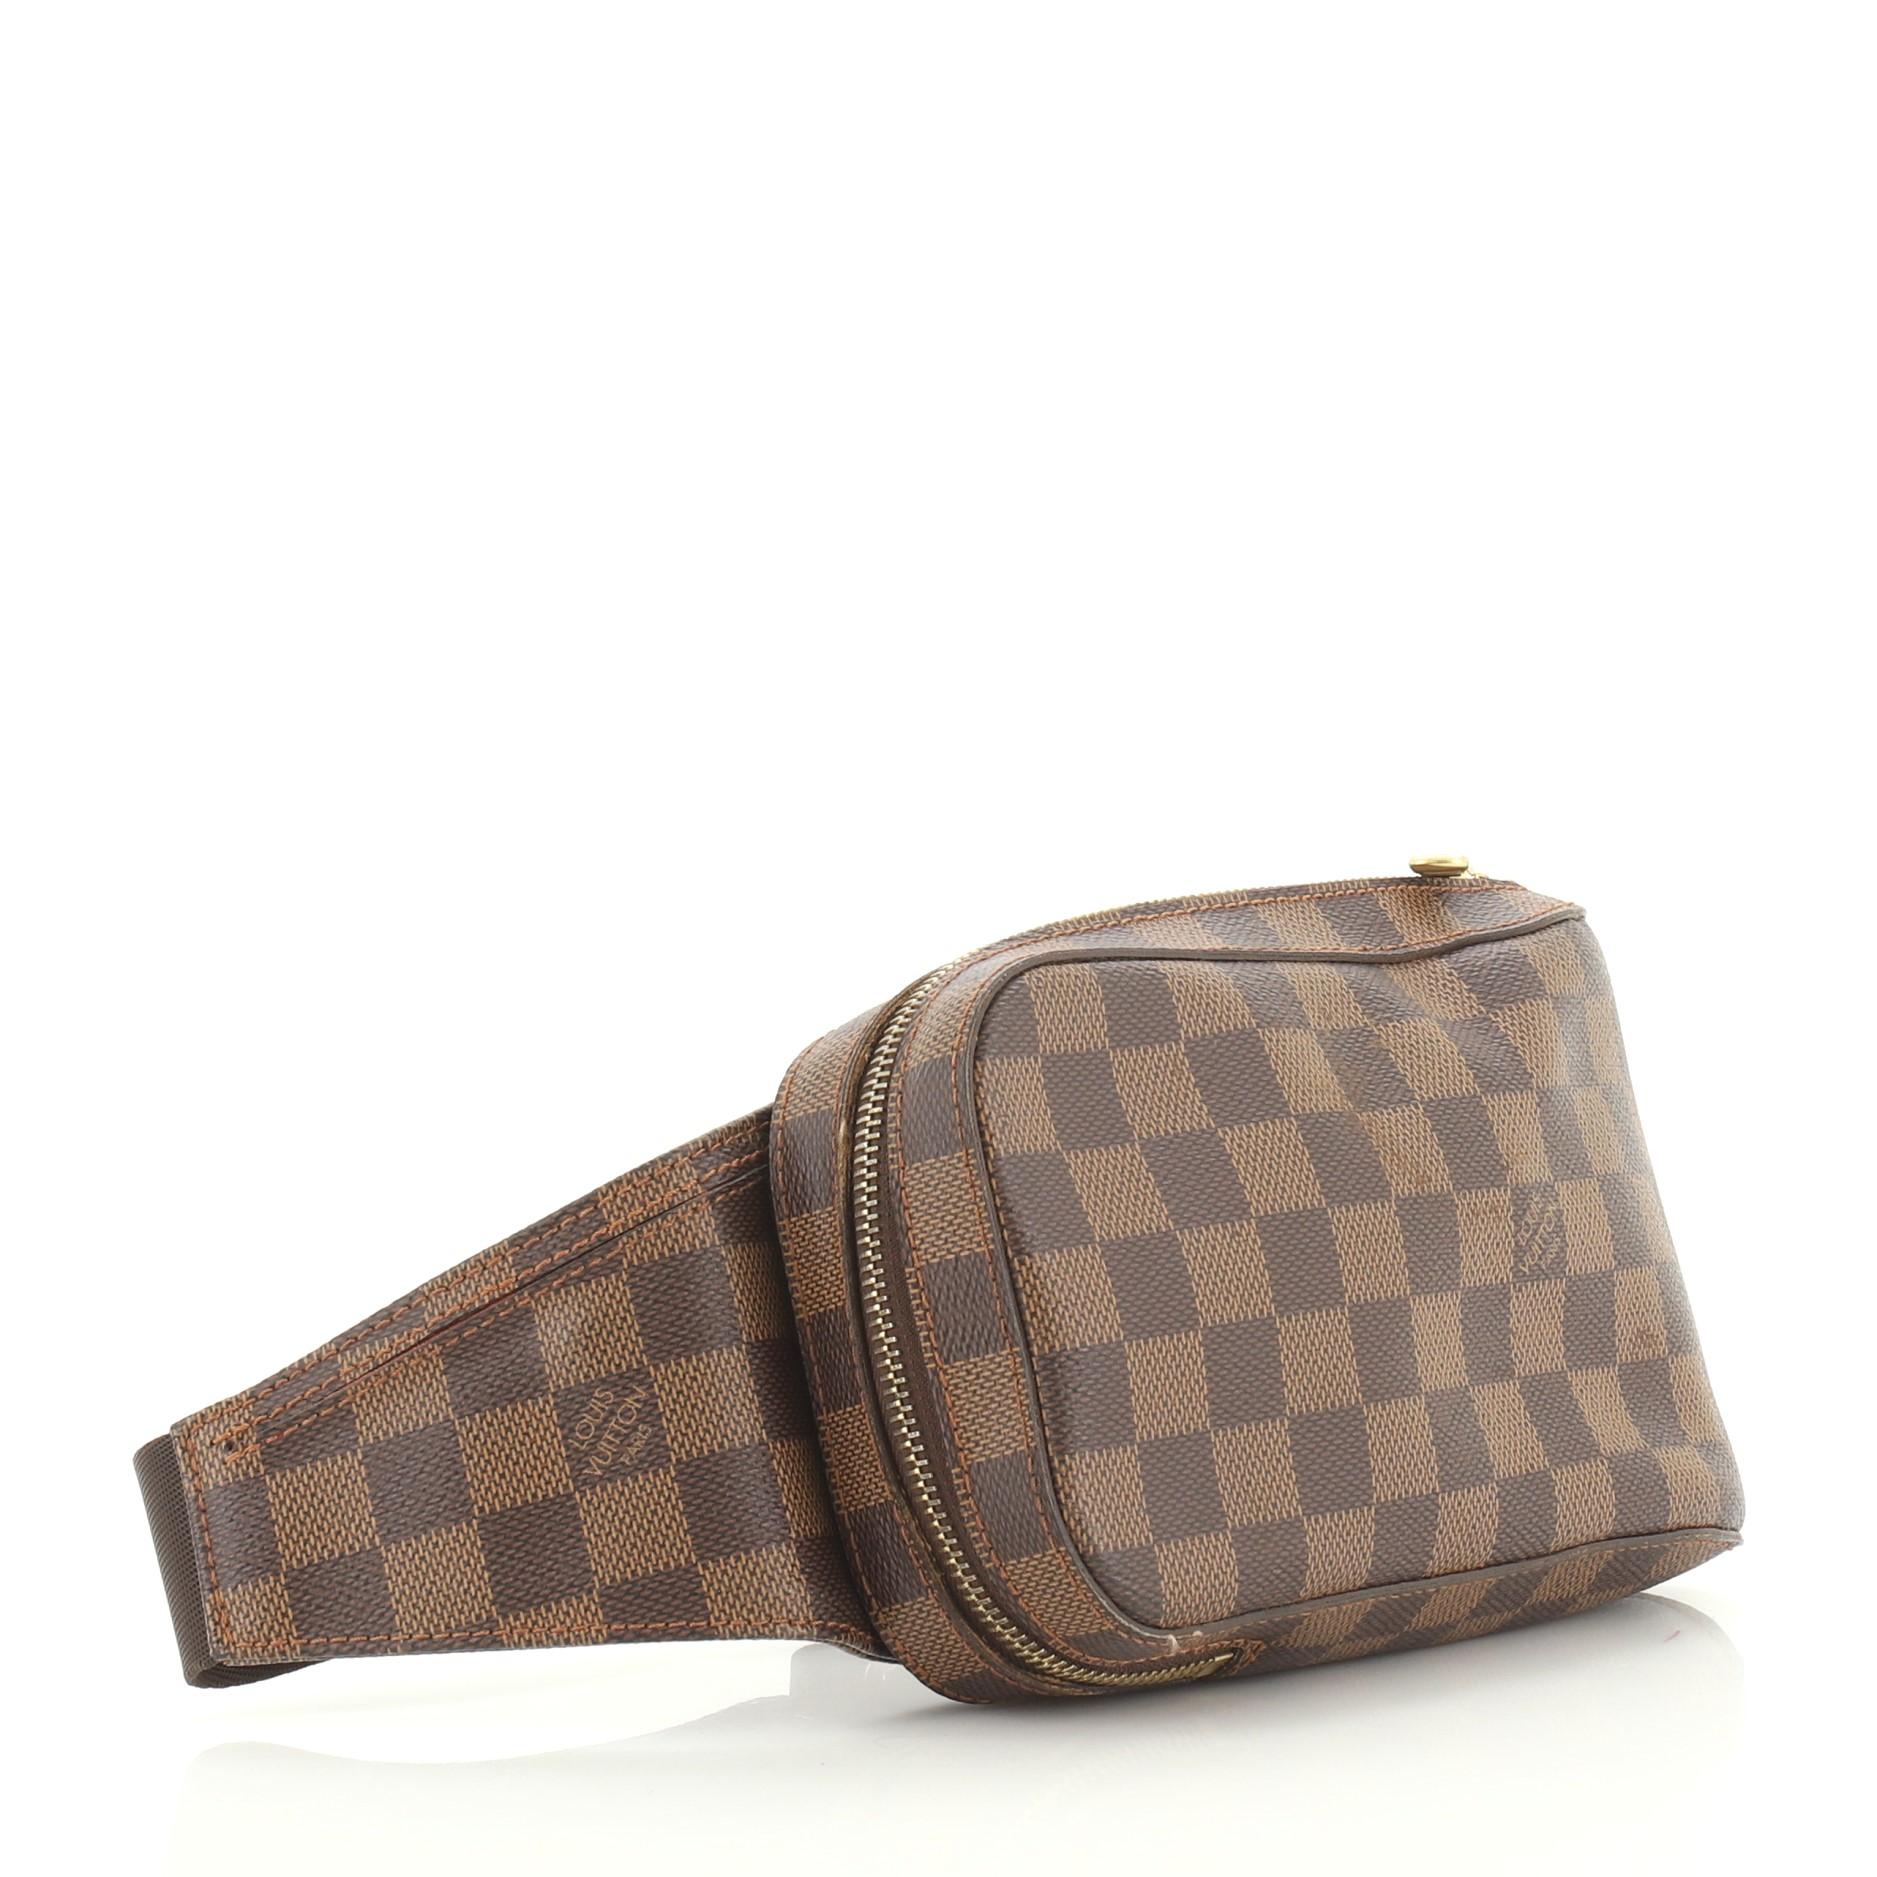 This Louis Vuitton Geronimos Waist Bag Damier, crafted from damier ebene coated canvas, features an adjustable canvas belt strap and gold-tone hardware. Its zip closure opens to an orange fabric interior. Authenticity code reads: CA1005. 

Estimated